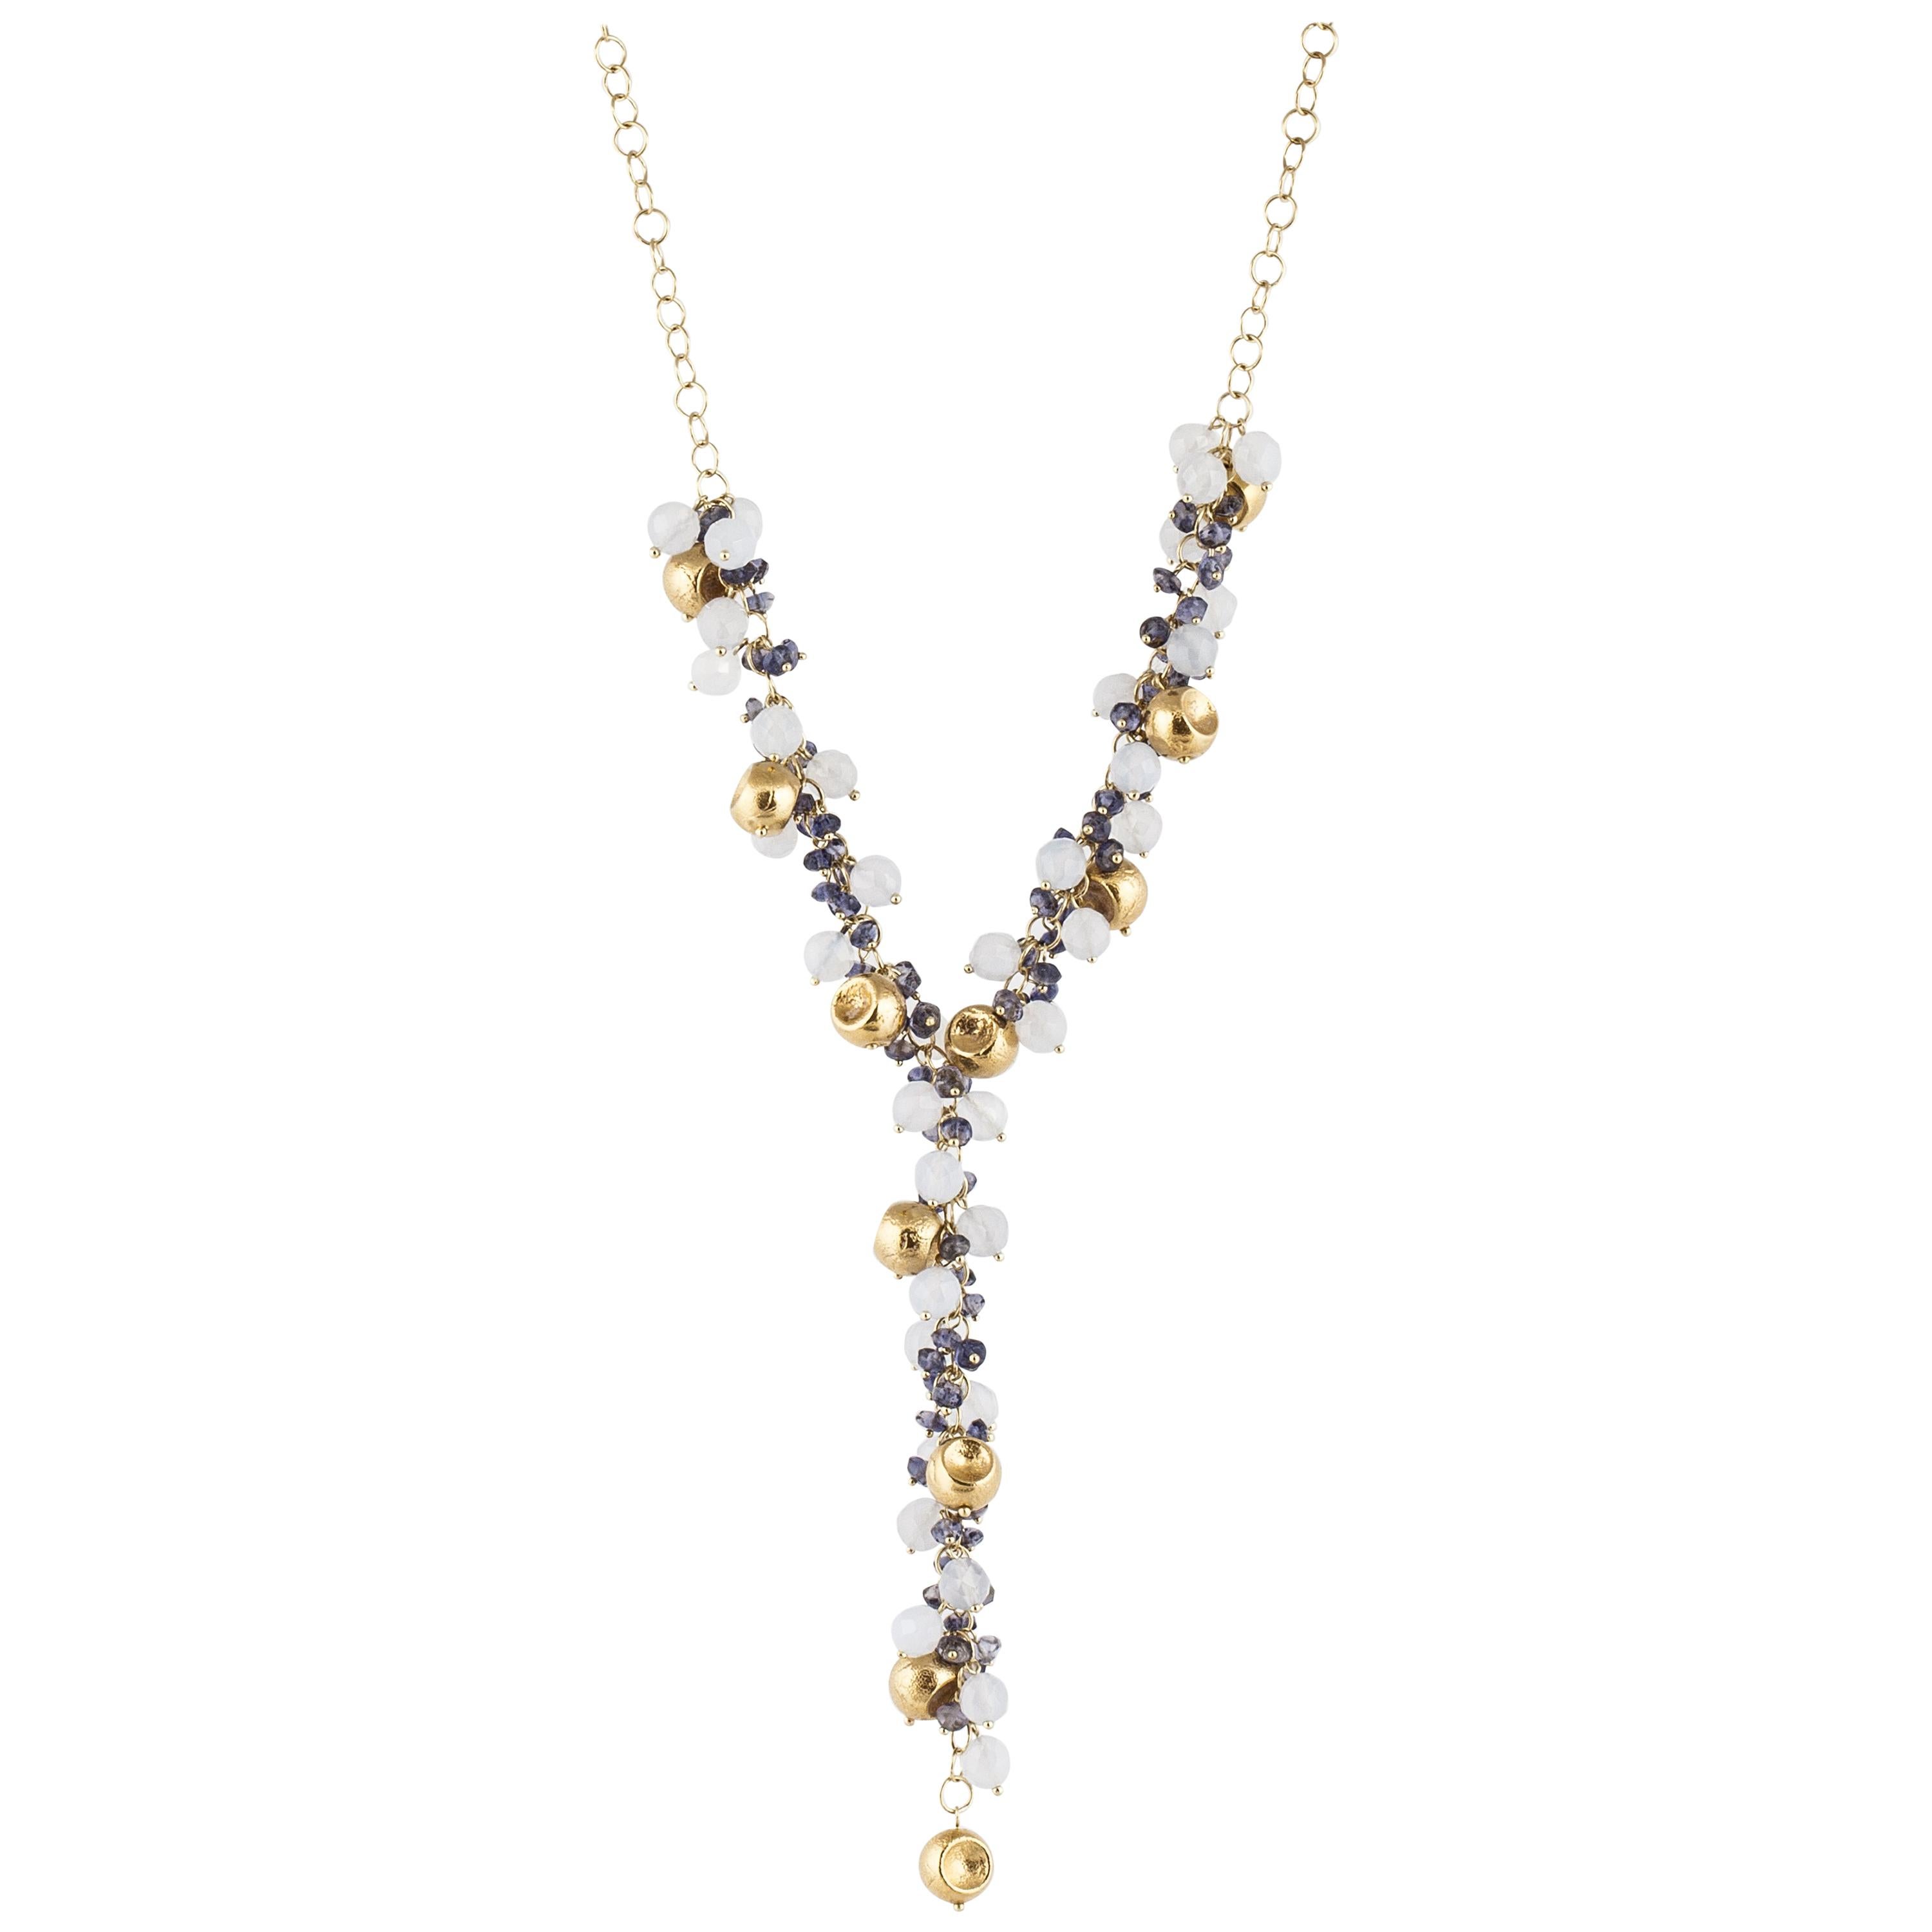  Sapphire and Moonstone Bead Necklace in 18K Gold